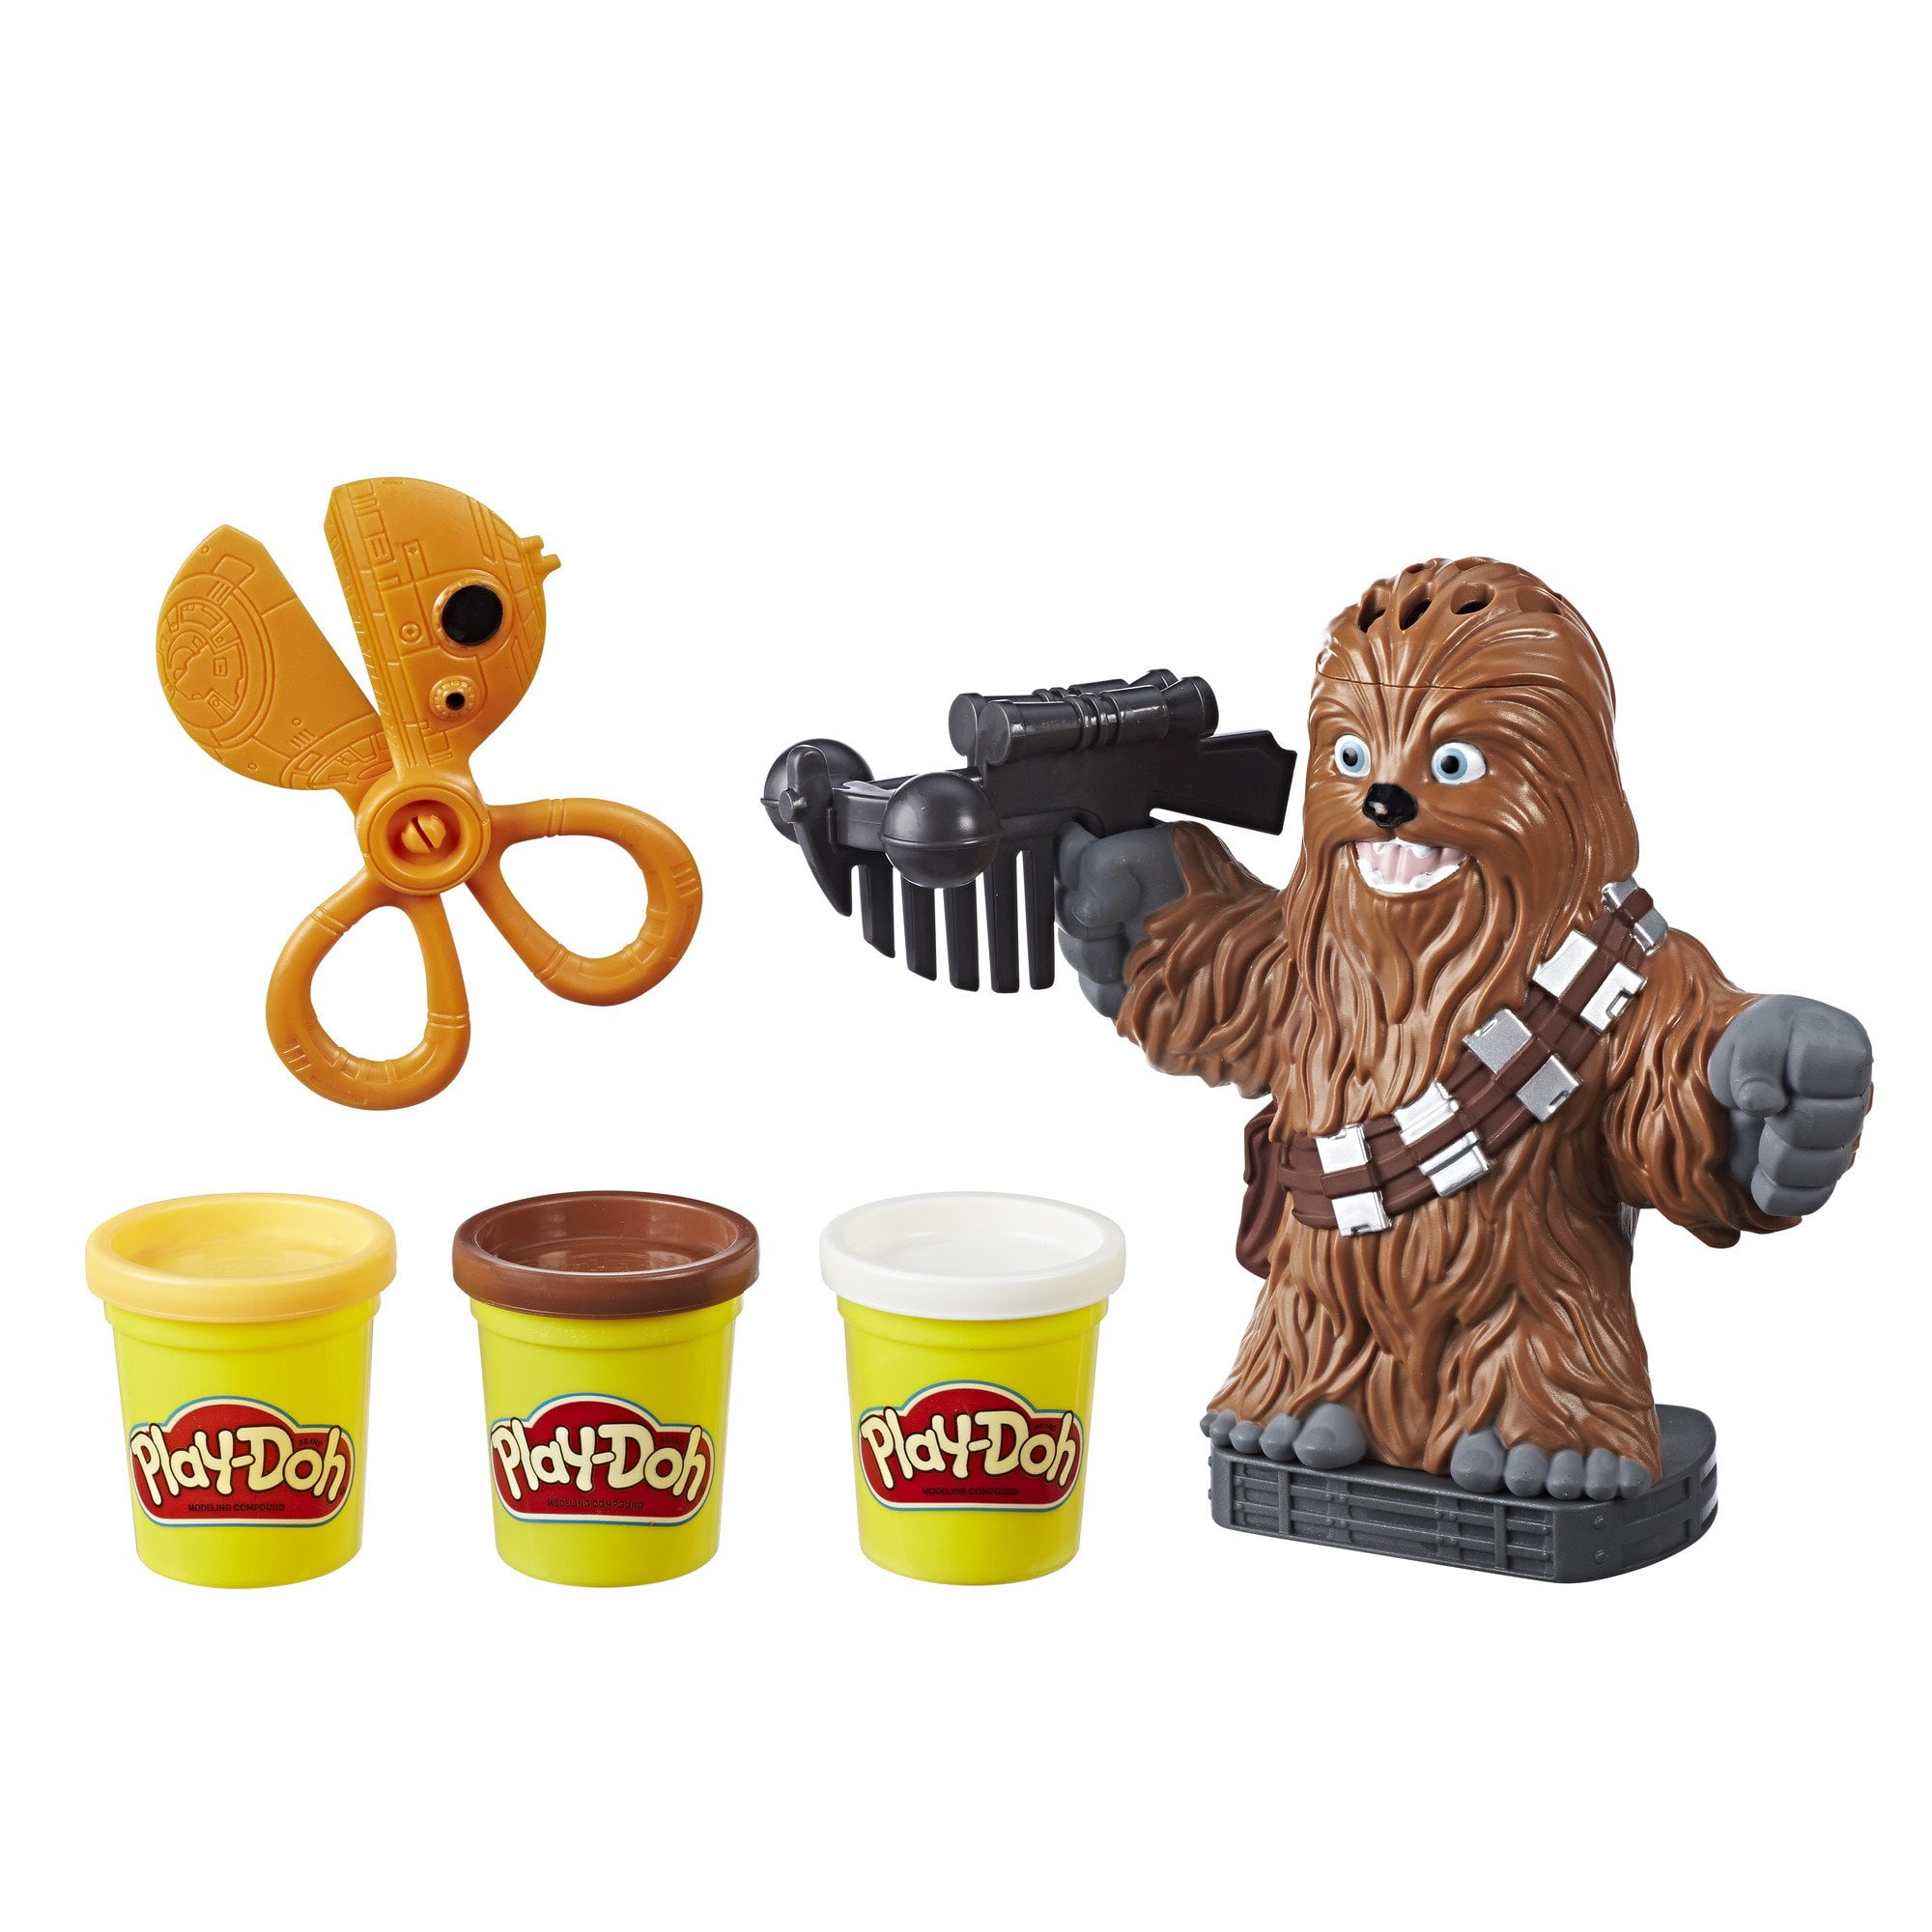 Play-Doh Star Wars Chewbacca, 2 oz. Cans of 3 Non-Toxic Play-Doh Colors 